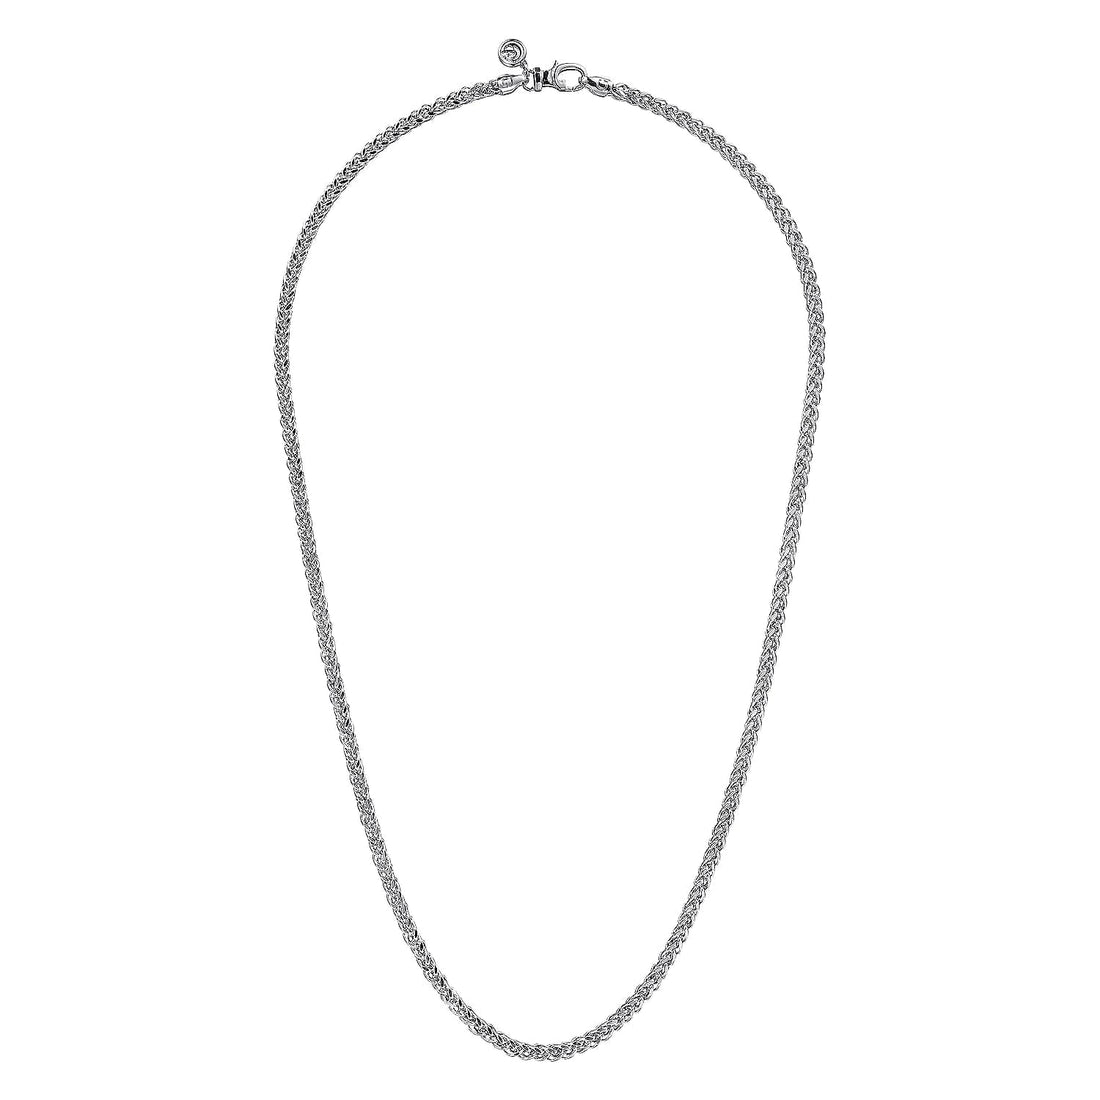 Gabriel & Co. 22 Inch 925 Sterling Silver Men's Wheat Chain Necklace - Skeie's Jewelers